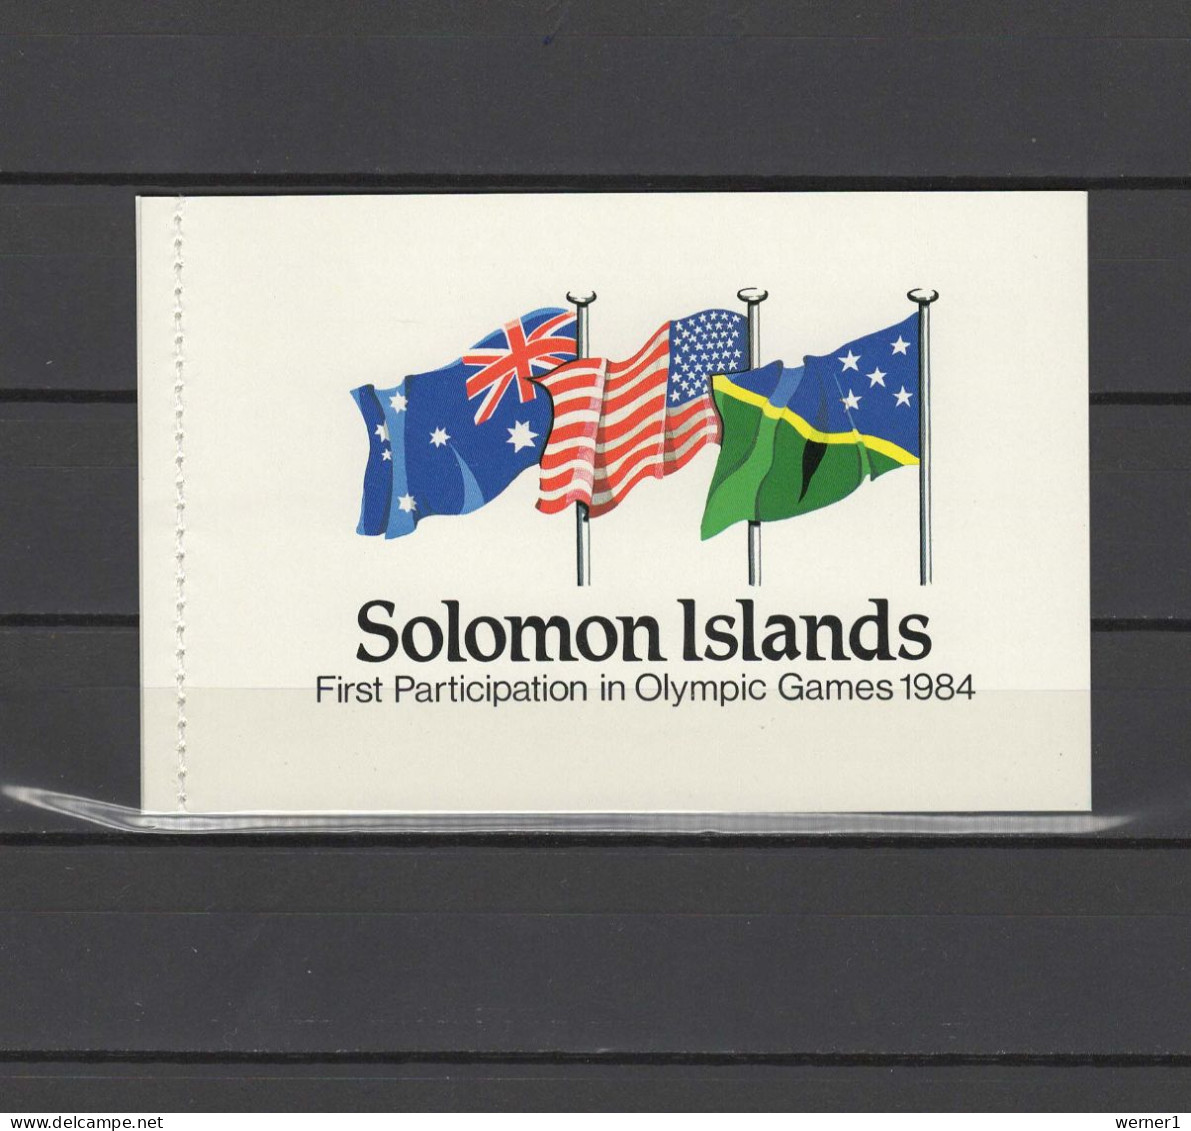 Solomon Islands 1984 Olympic Games Los Angeles Stamp Booklet MNH - Ete 1984: Los Angeles